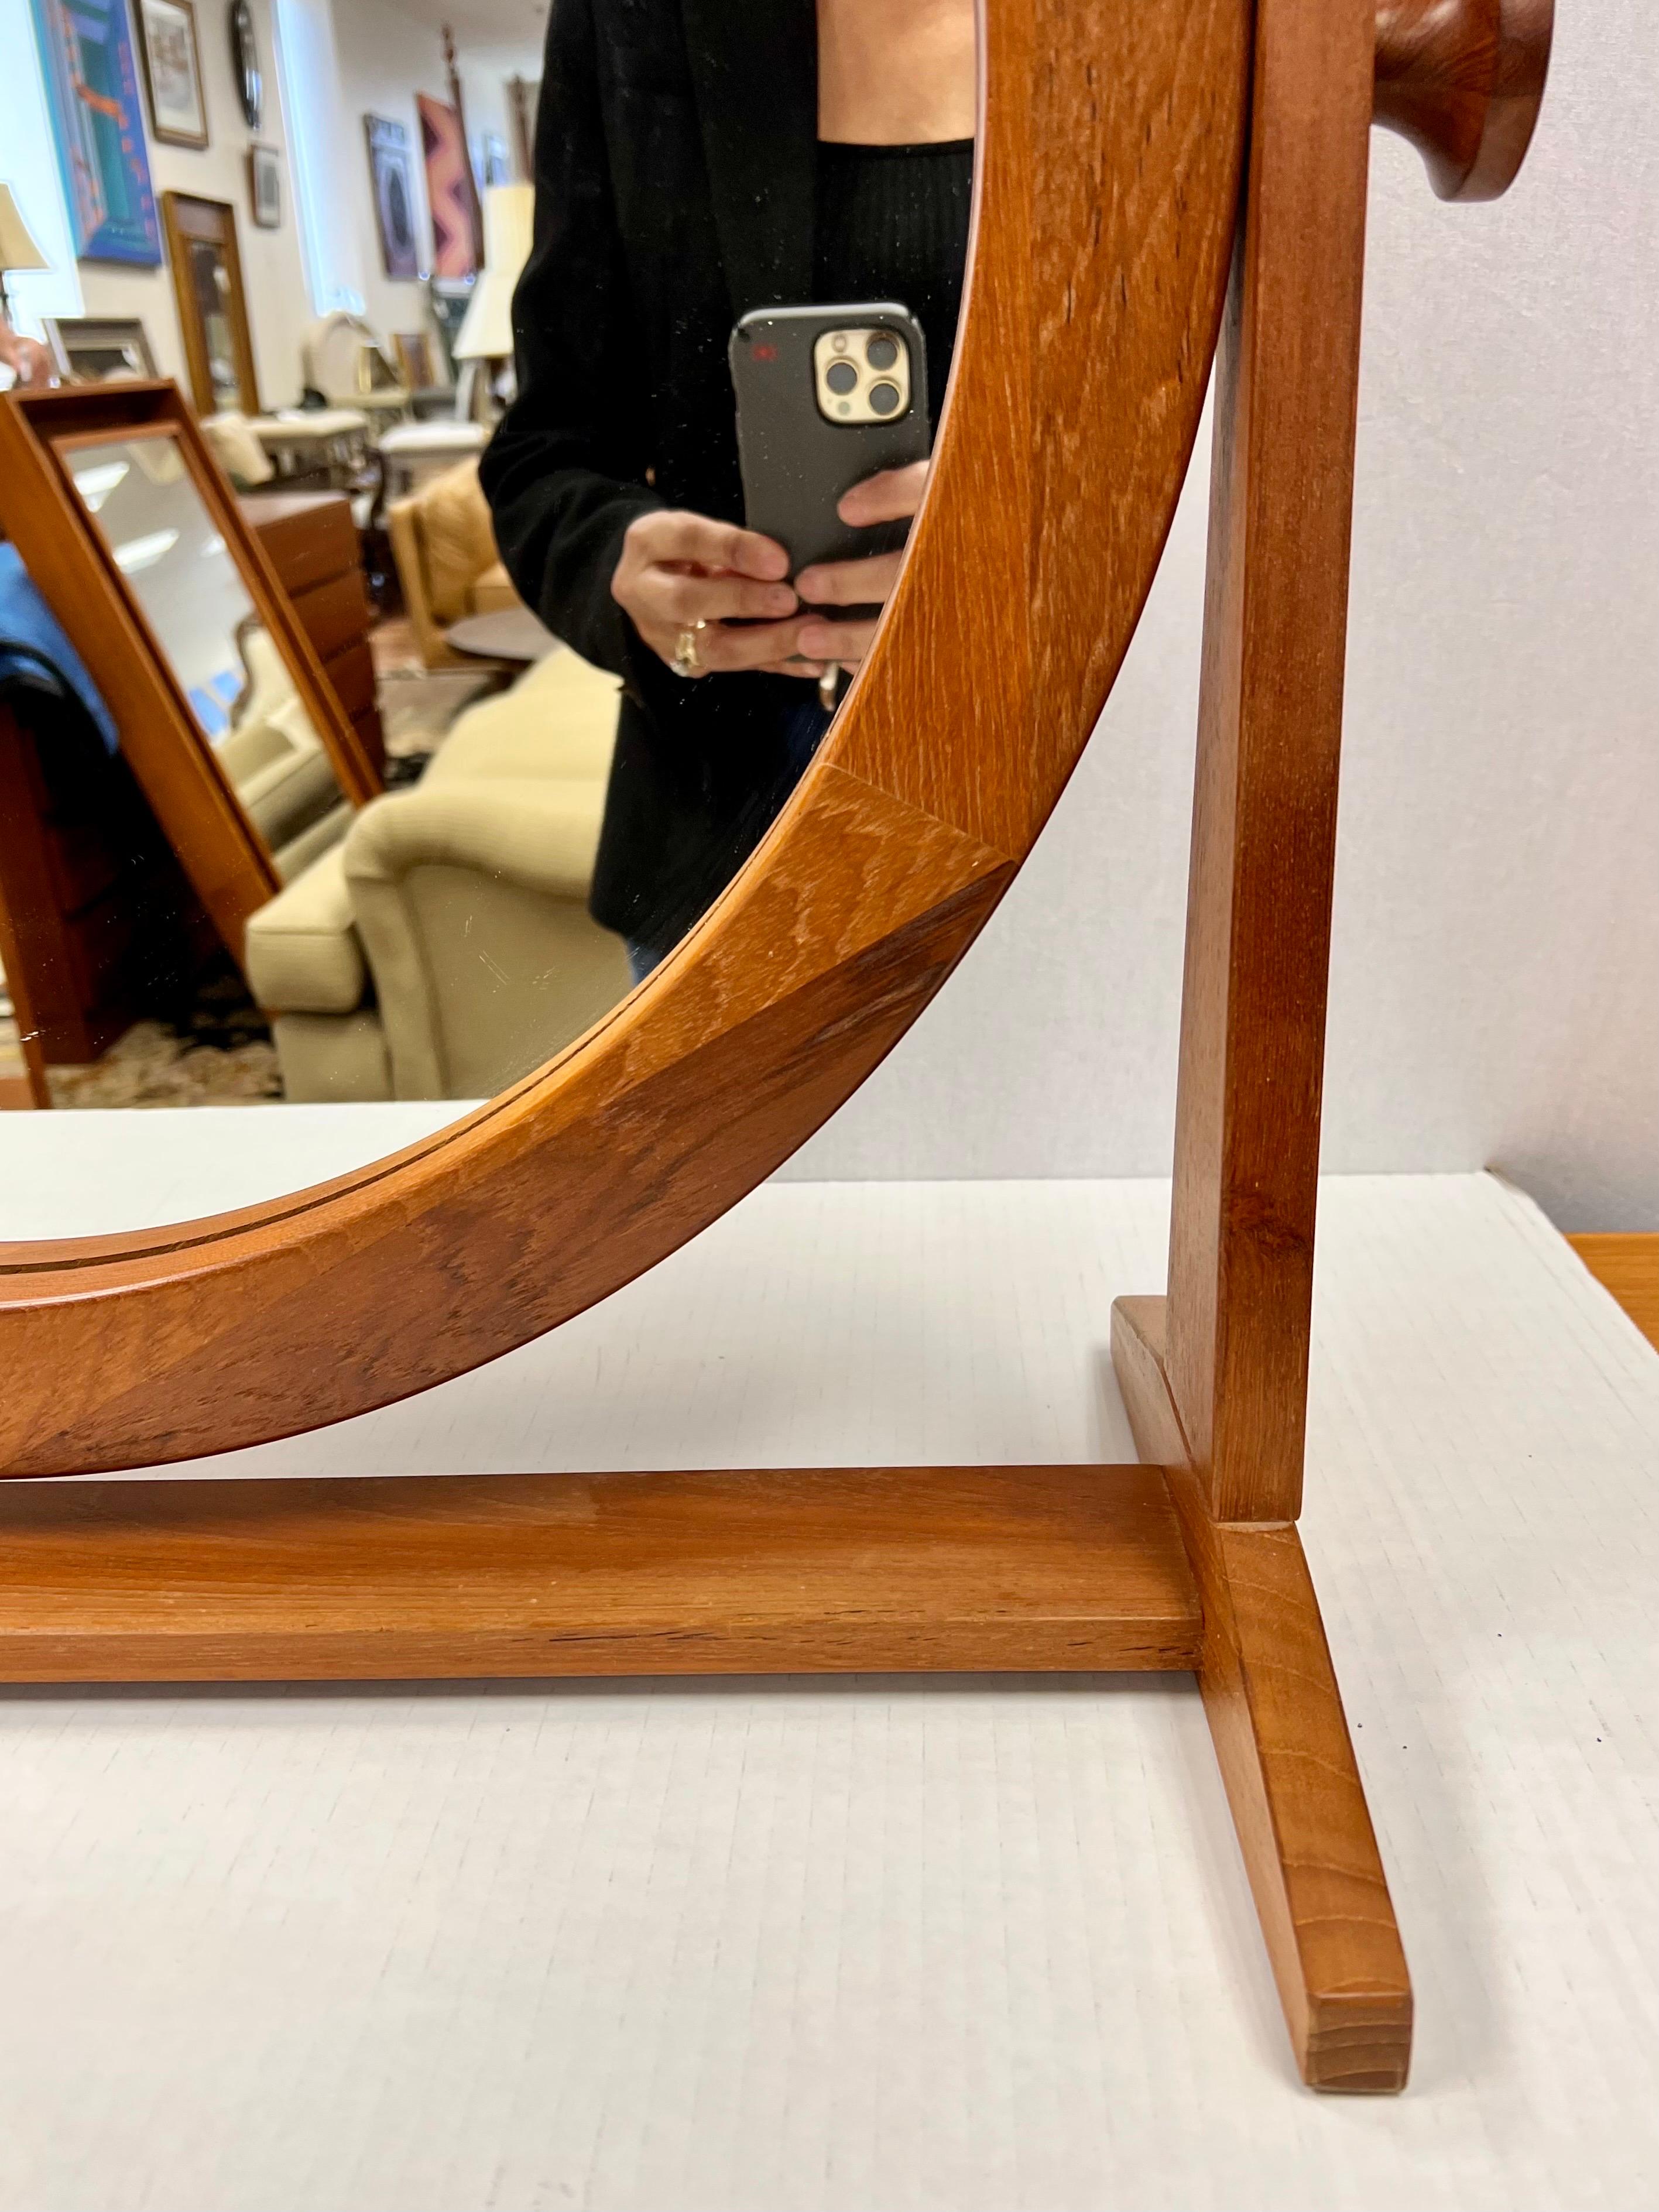 Danish modern vanity cheval mirror by Pedersen & Hansen. The glass portion is 19.5 inches in diameter and the frame with the knobs is 28 inches wide. The frame is made of teak. The mirror frame has great finger joint details. The mirror can tilt up